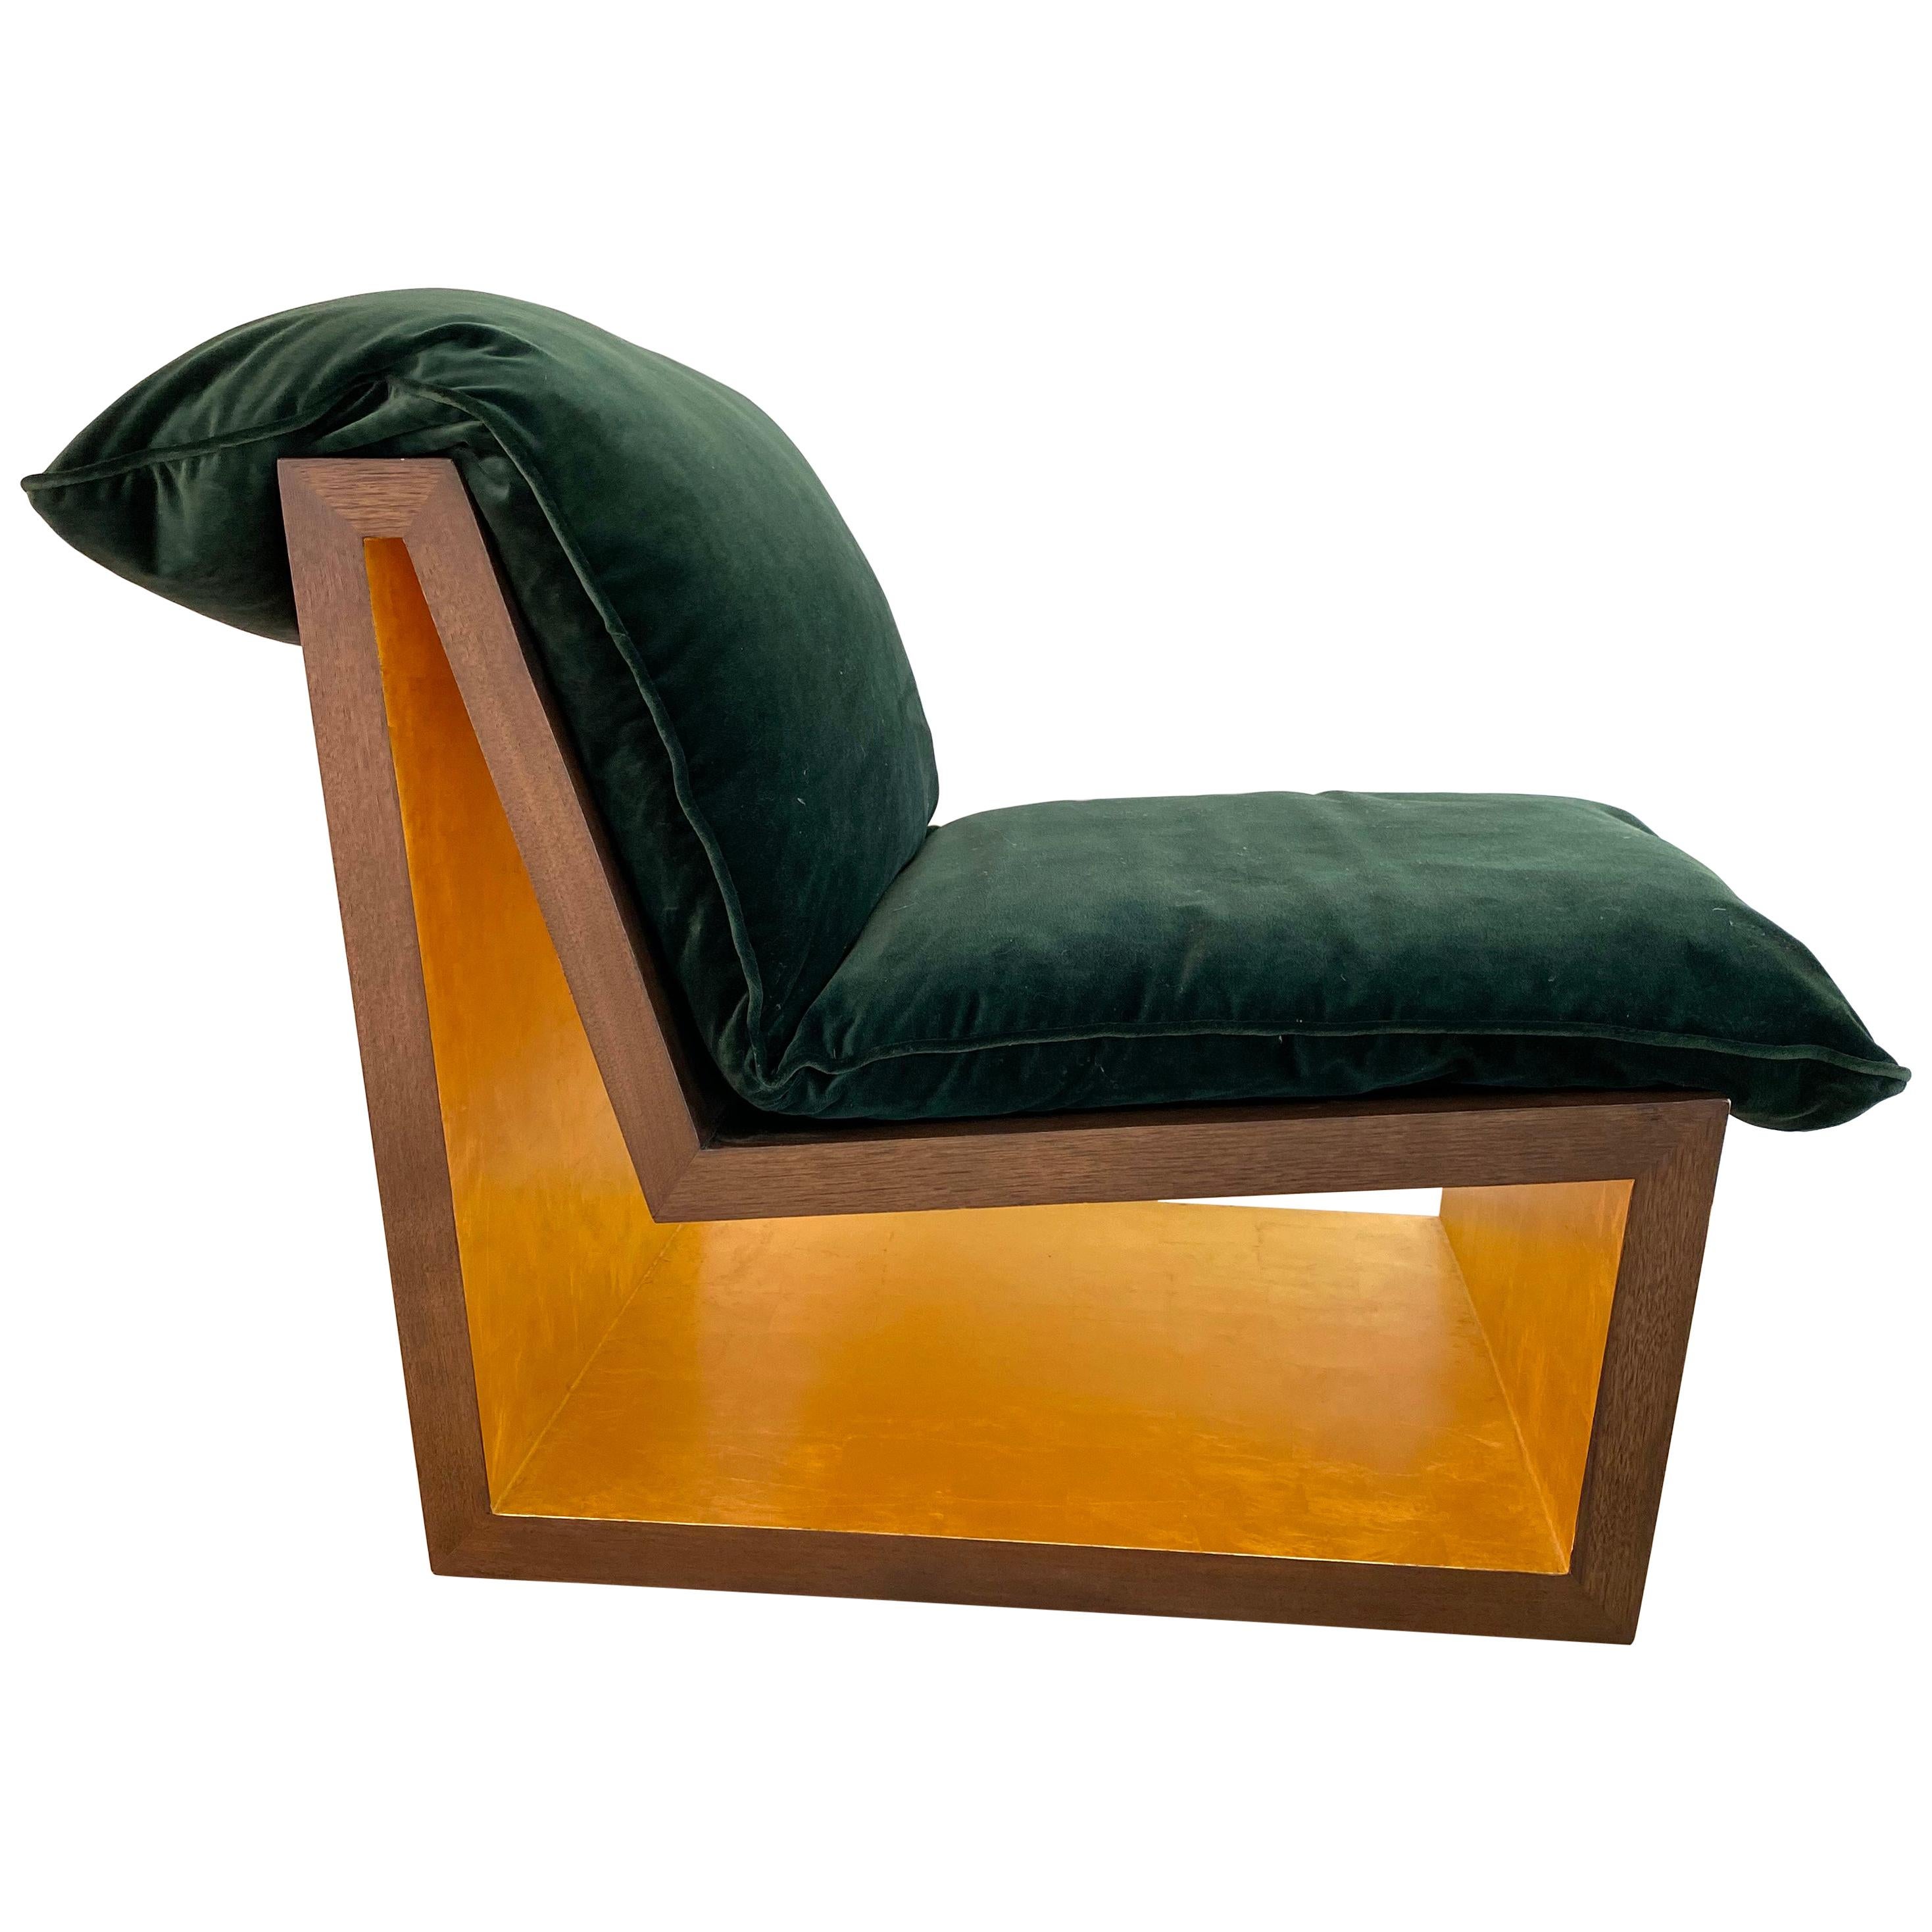 Tucker Lounge Chair, Contemporary, Walnut and Gold Leaf, by Dean and Dahl